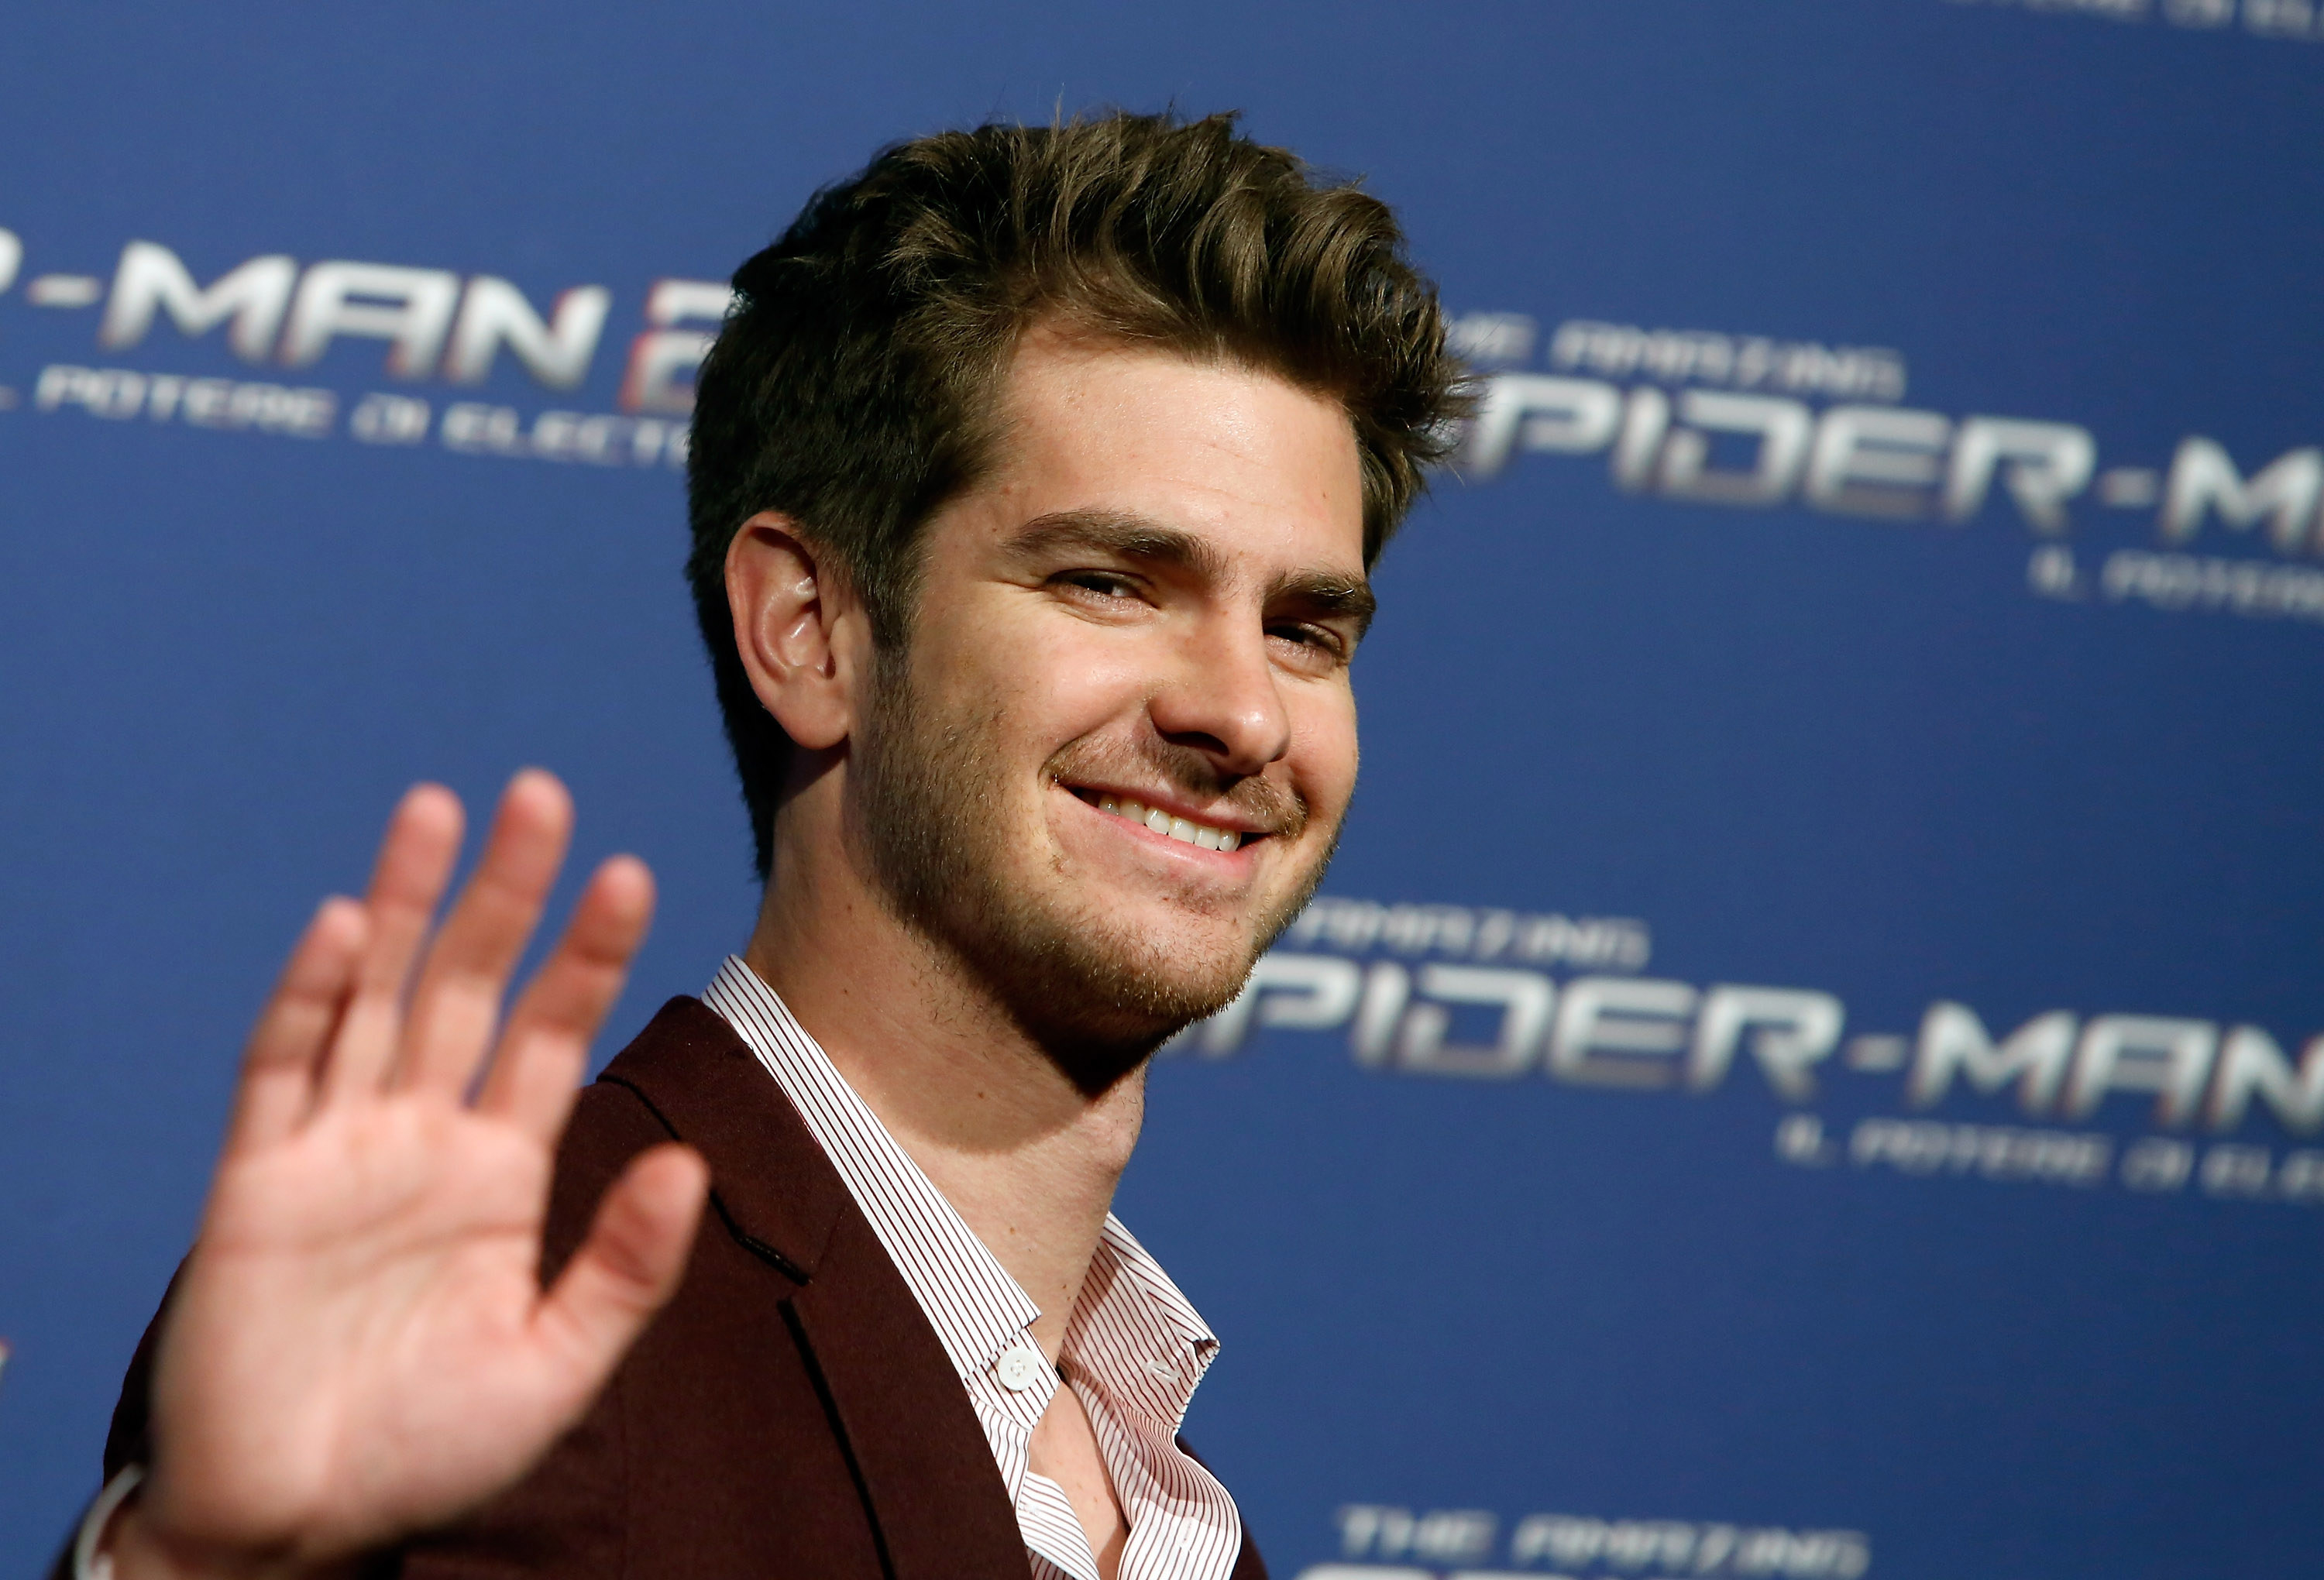 Close-up of Andrew smiling and waving at a Spider-Man event